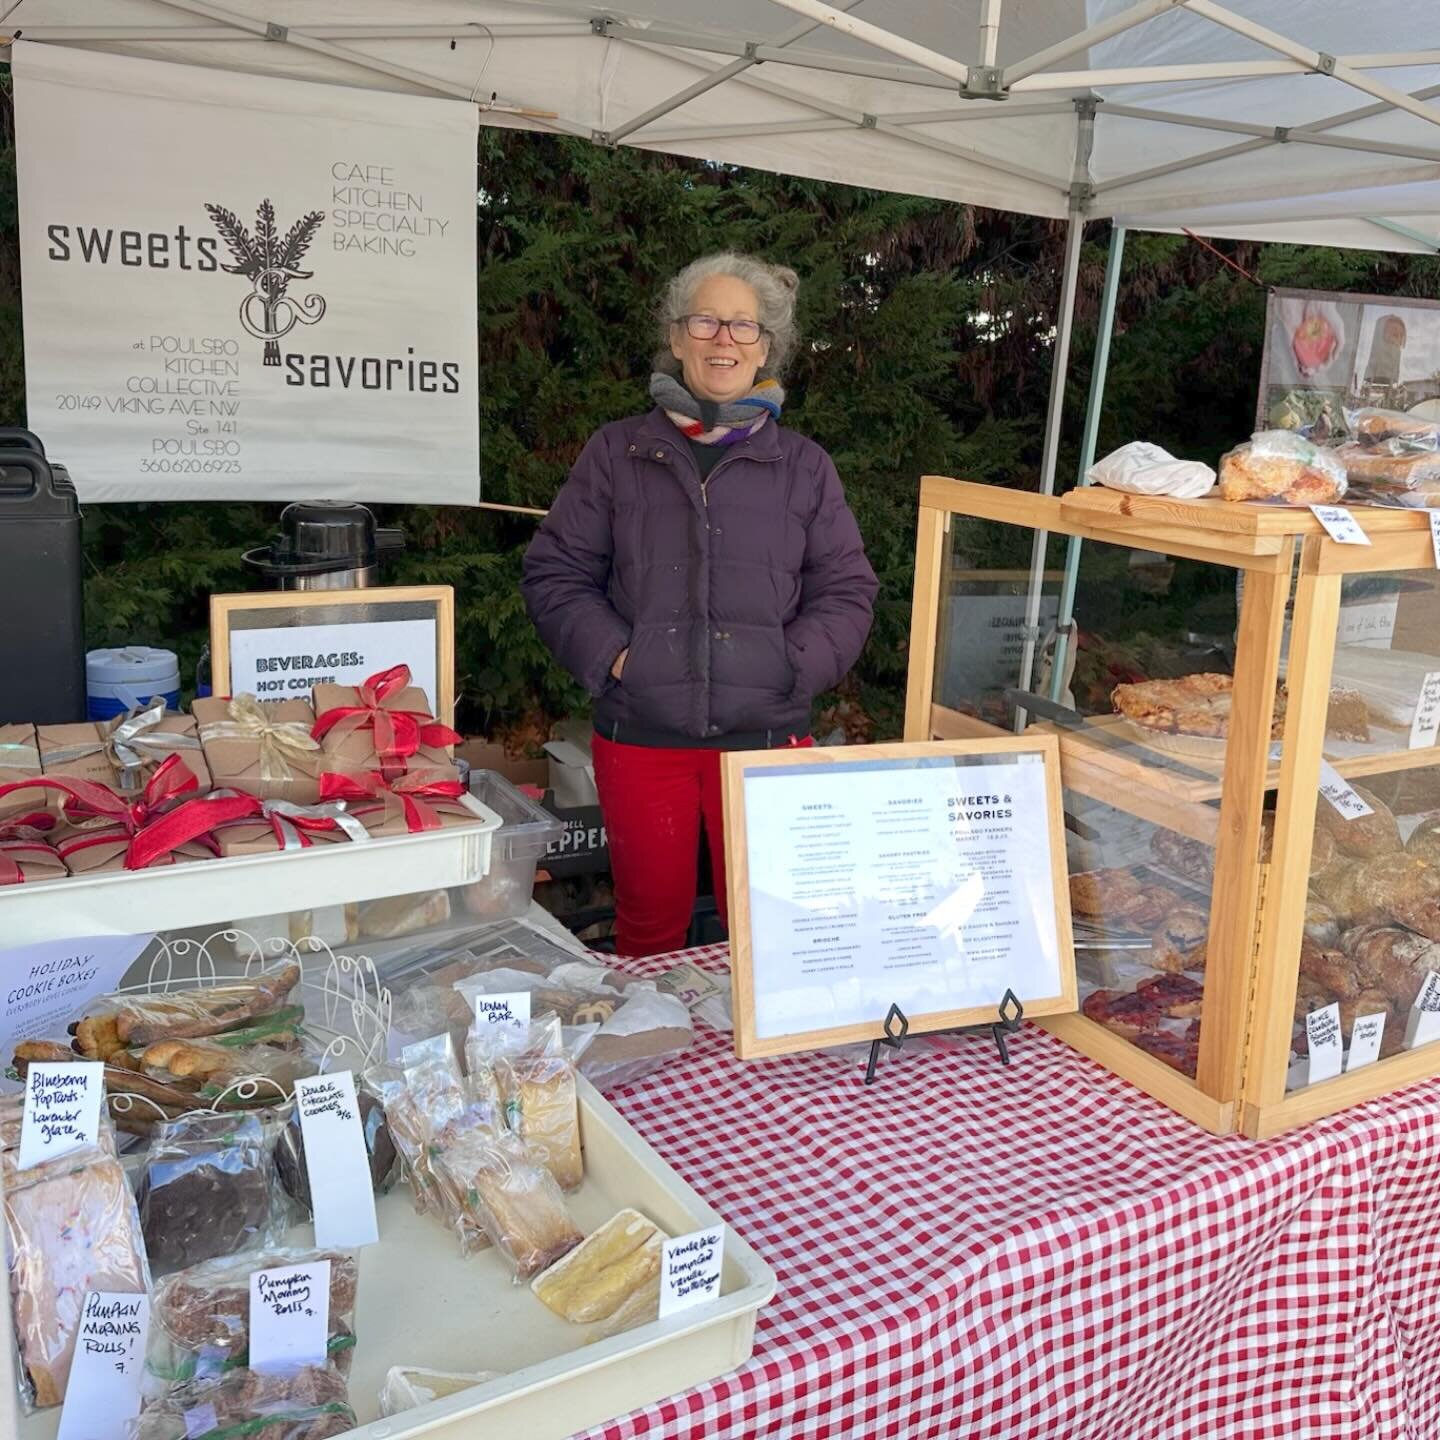 Second to last weekend of our market!! Here&rsquo;s a peek at last week.

Come say hi &amp; shop local while you can. Gifts for everyone, holiday specials, and friendly faces. 

We can&rsquo;t wait to see you Saturday 10am - 2pm!
.
.
.
.
#poulsbofarm